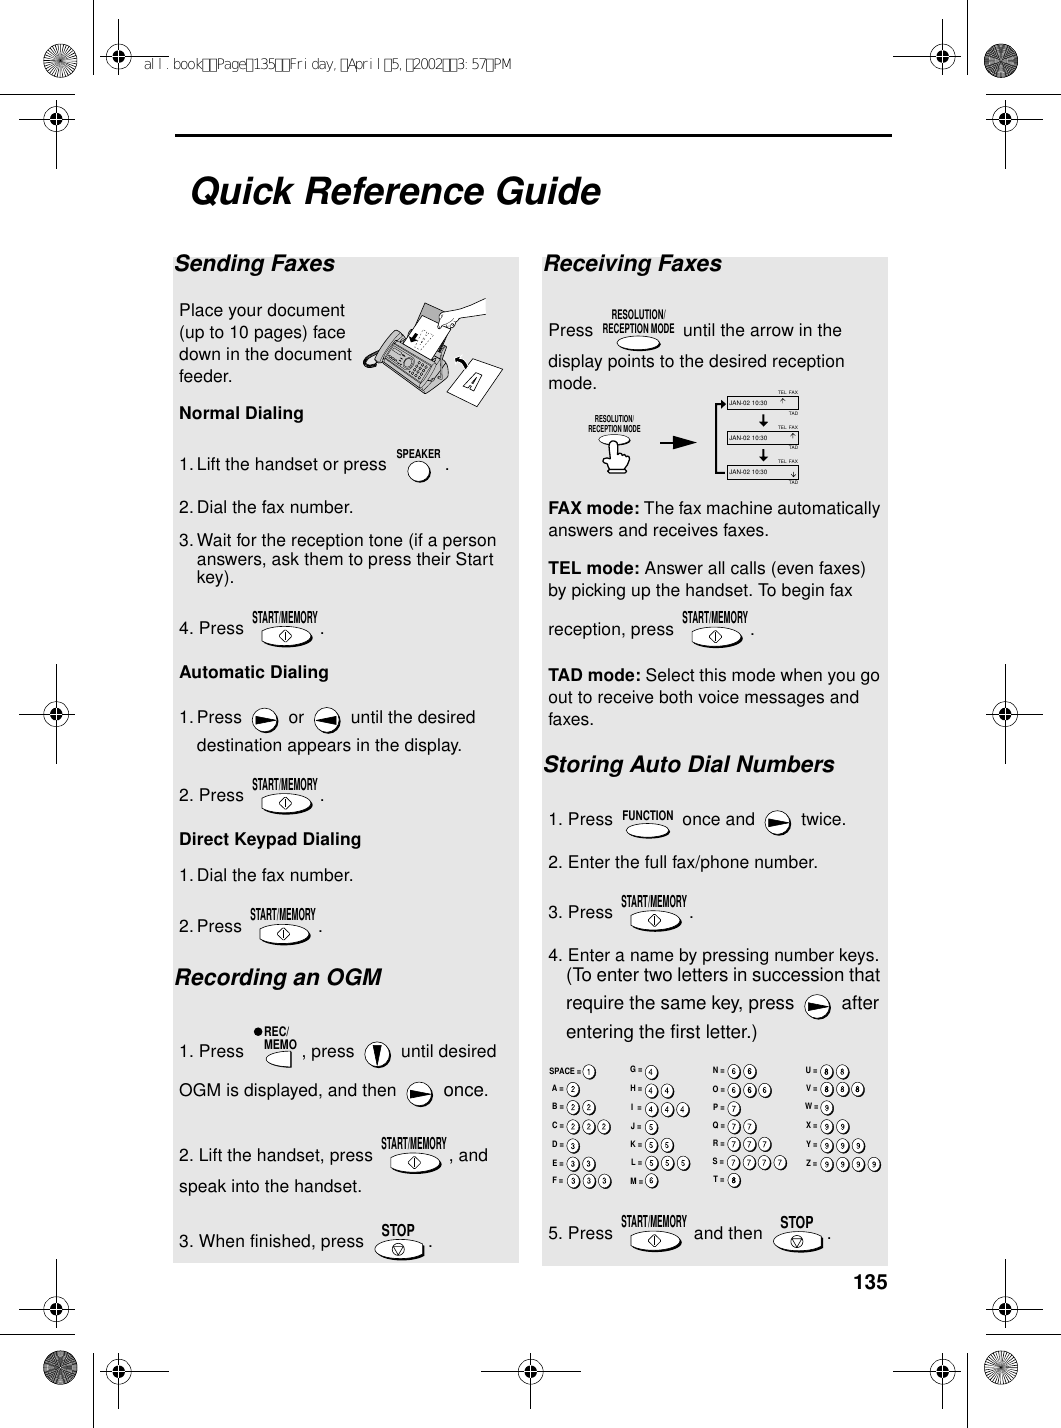 135Quick Reference GuideSending FaxesPlace your document (up to 10 pages) face down in the document feeder.Normal Dialing 1.Lift the handset or press  .2. Dial the fax number. 3. Wait for the reception tone (if a person answers, ask them to press their Start key). 4. Press  .Automatic Dialing1. Press   or   until the desired destination appears in the display.2. Press  .Direct Keypad Dialing  1. Dial the fax number. 2. Press .Recording an OGM1. Press  , press   until desired OGM is displayed, and then   once.2. Lift the handset, press  , and speak into the handset.3. When finished, press  .SPEAKERSTART/MEMORYSTART/MEMORYSTART/MEMORYREC/MEMOSTART/MEMORYSTOPReceiving FaxesPress   until the arrow in the display points to the desired reception mode.FAX mode: The fax machine automatically answers and receives faxes.TEL mode: Answer all calls (even faxes) by picking up the handset. To begin fax reception, press  .TAD mode: Select this mode when you go out to receive both voice messages and faxes.Storing Auto Dial Numbers1. Press   once and   twice.2. Enter the full fax/phone number.3. Press  .4. Enter a name by pressing number keys. (To enter two letters in succession that require the same key, press   after entering the first letter.)5. Press   and then  .RESOLUTION/RECEPTION MODESTART/MEMORYFUNCTIONSTART/MEMORYSTART/MEMORYSTOPFAXTELJAN-02 10:30FAXTELJAN-02 10:30FAXTELJAN-02 10:30TADTADTADRESOLUTION/RECEPTION MODEA =B =C =D =E =F =G =H =I  =J =K =L =M =N =O =P =Q =R =S =T =U =V =W =X =Y =Z =SPACE =all.bookPage135Friday,April5,20023:57PM